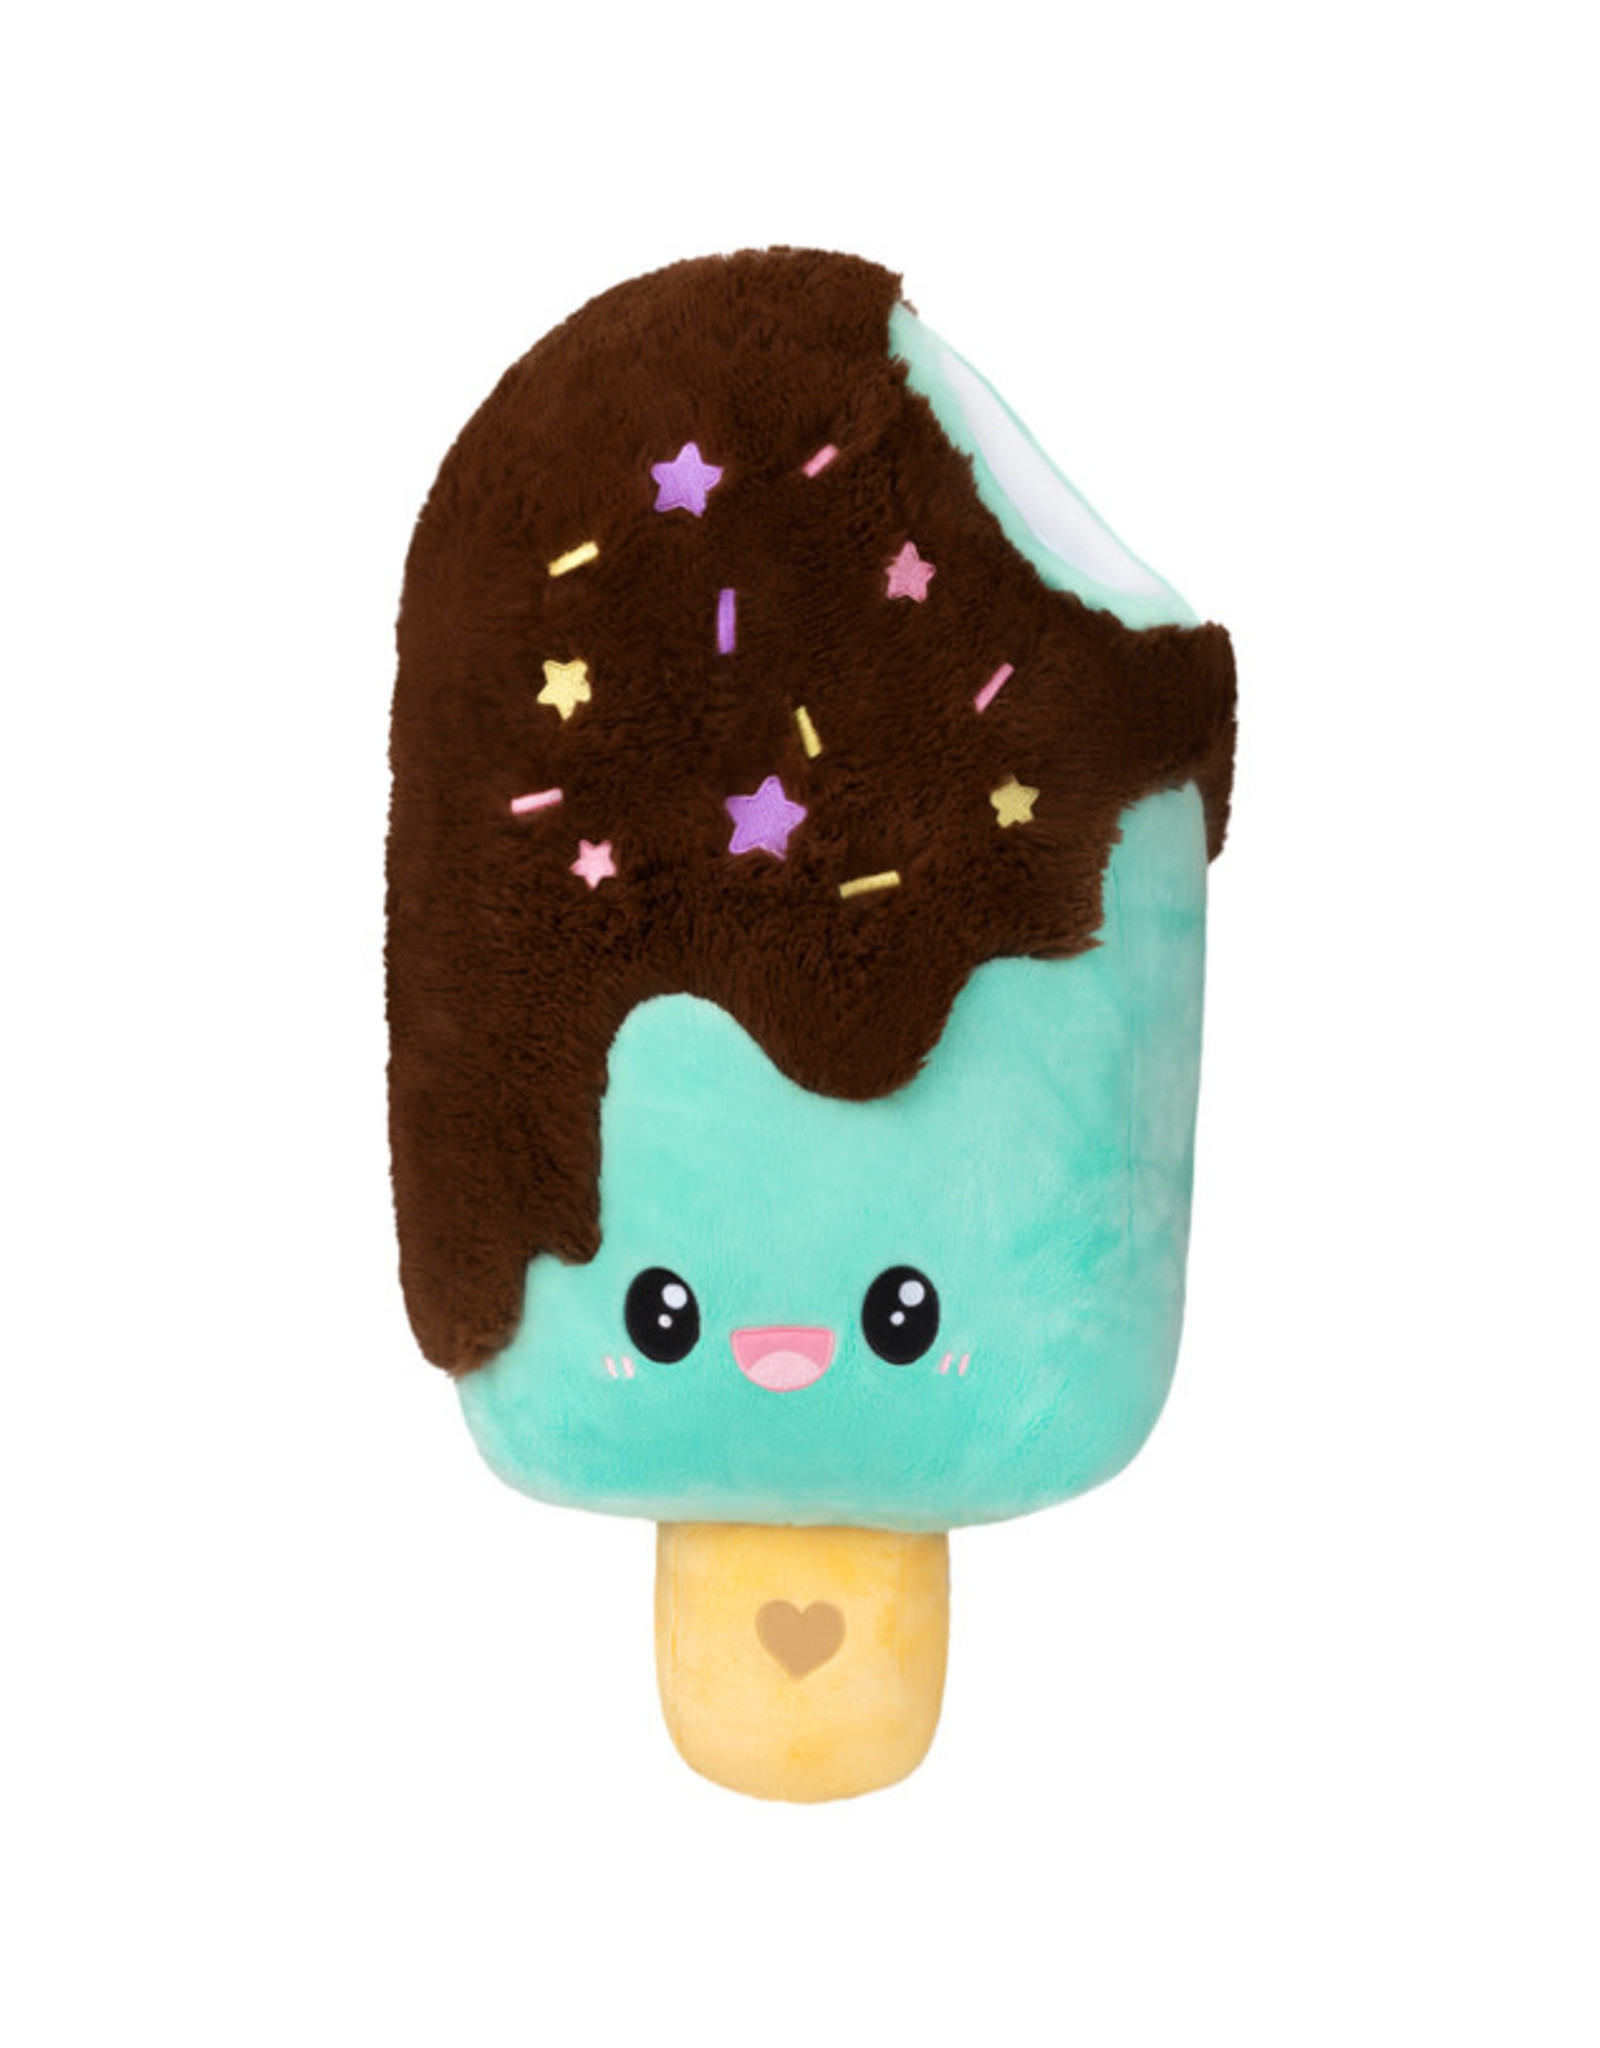 Squishable Squishable Comfort Food Mint Dipped Ice Cream Pop